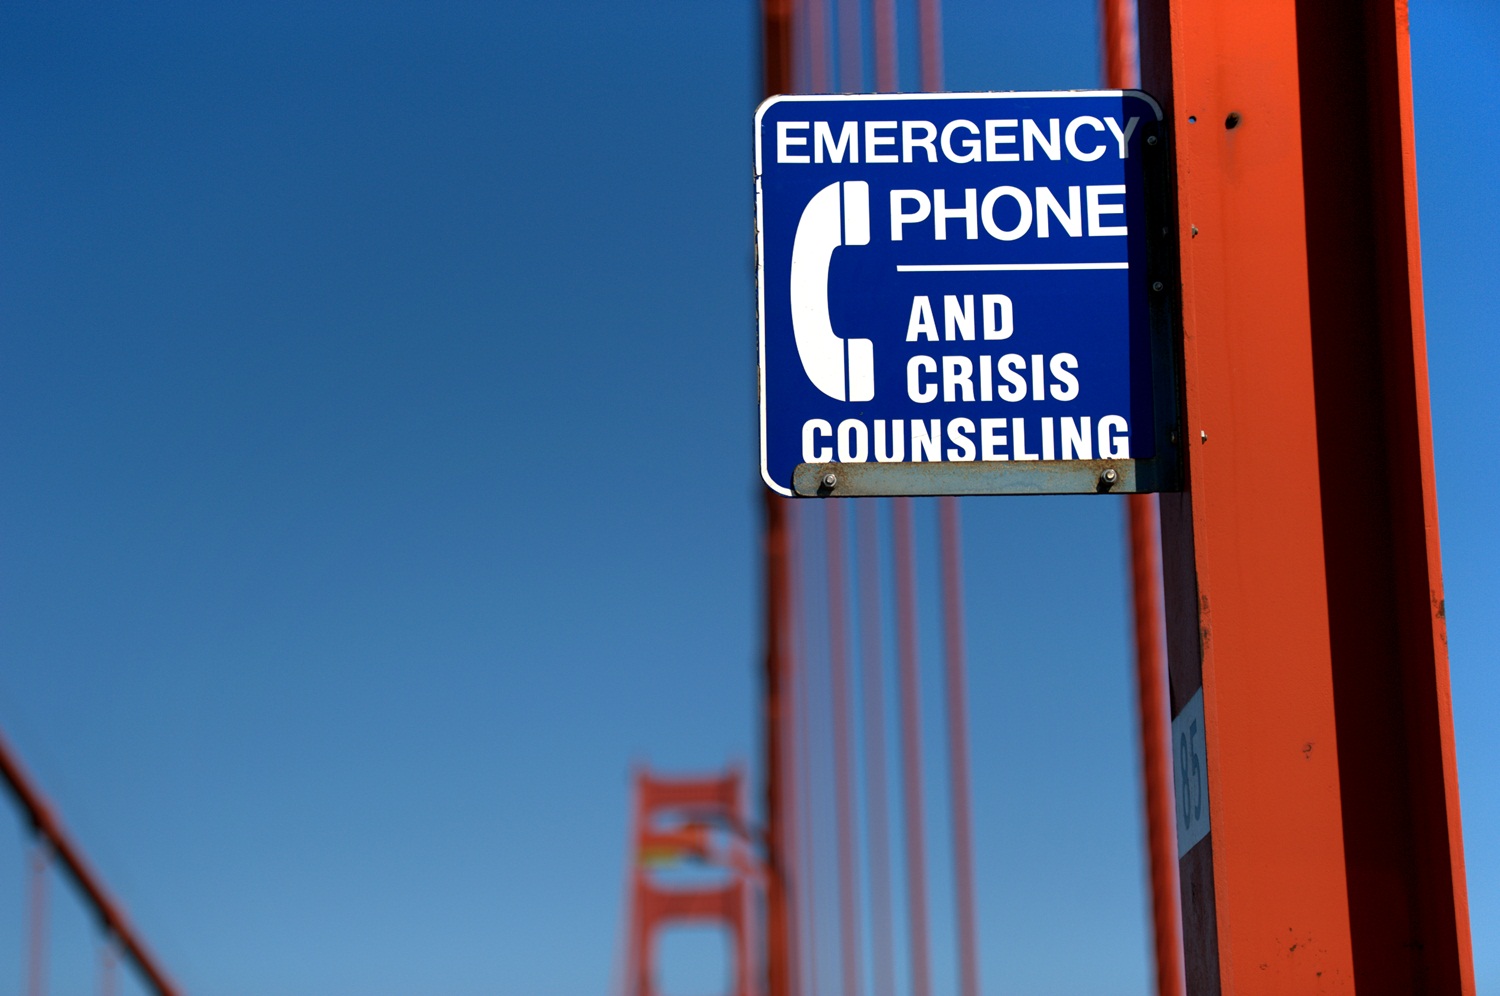 Suicide prevention sign on the east sidewalk of the Golden Gate Bridge, San Francisco, California. The sign reads "Emergency phone and crisis counseling."